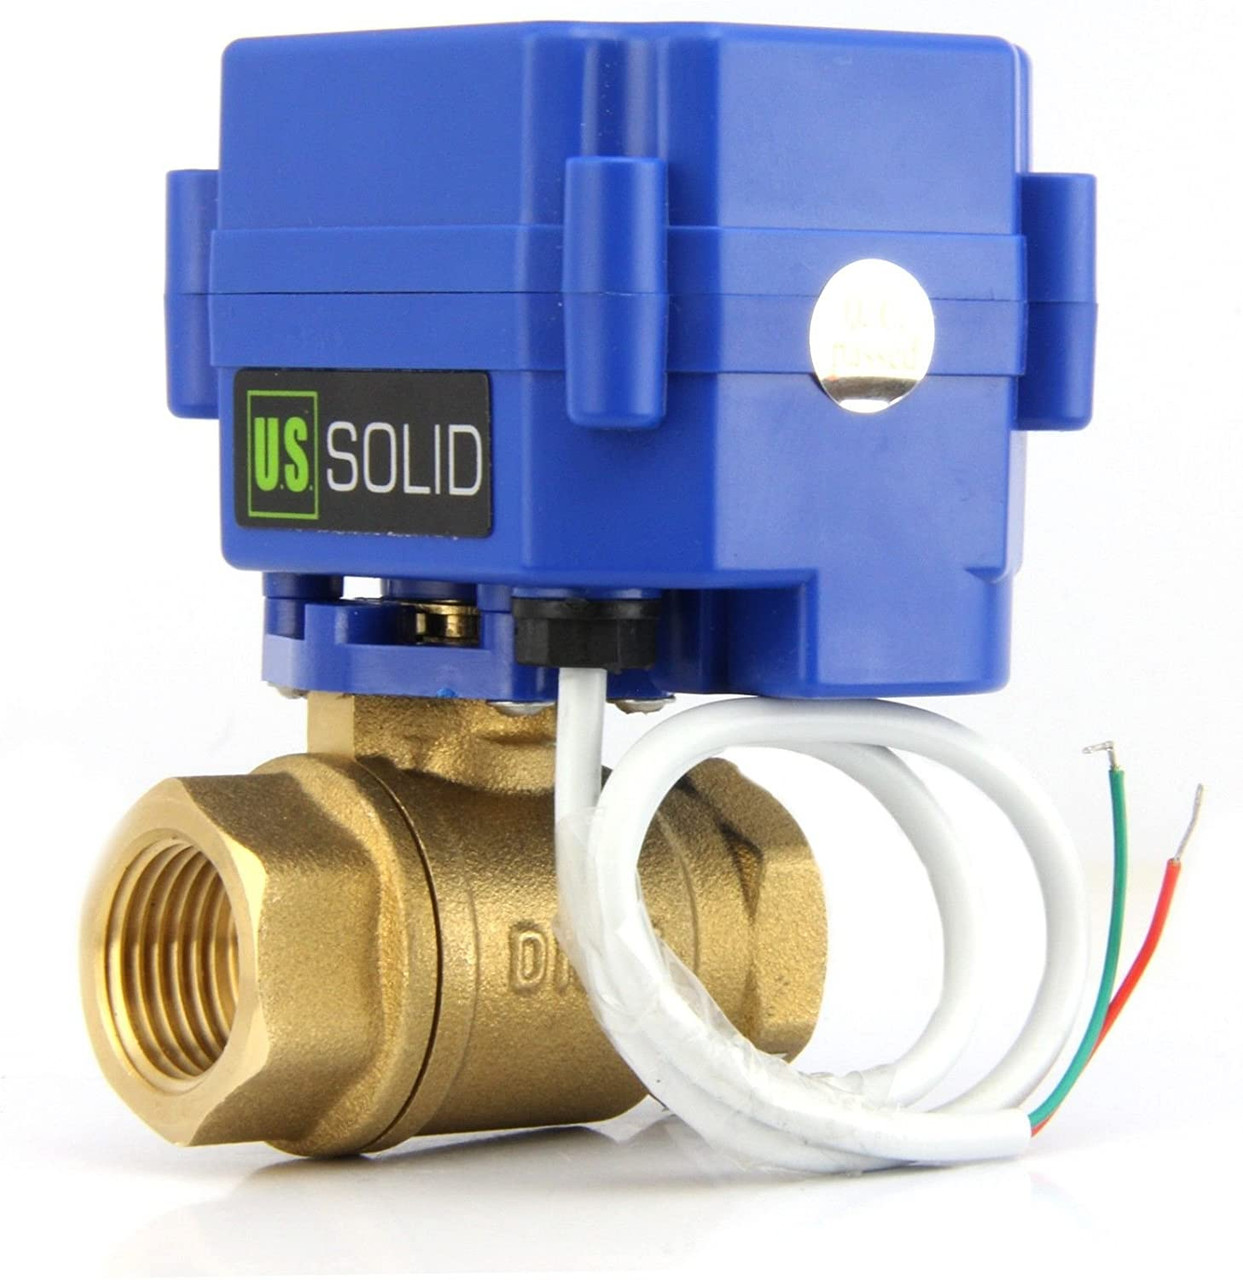 U.S. Solid Motorized Ball Valve- 1/2” Brass Electrical Ball Valve with Full  Port